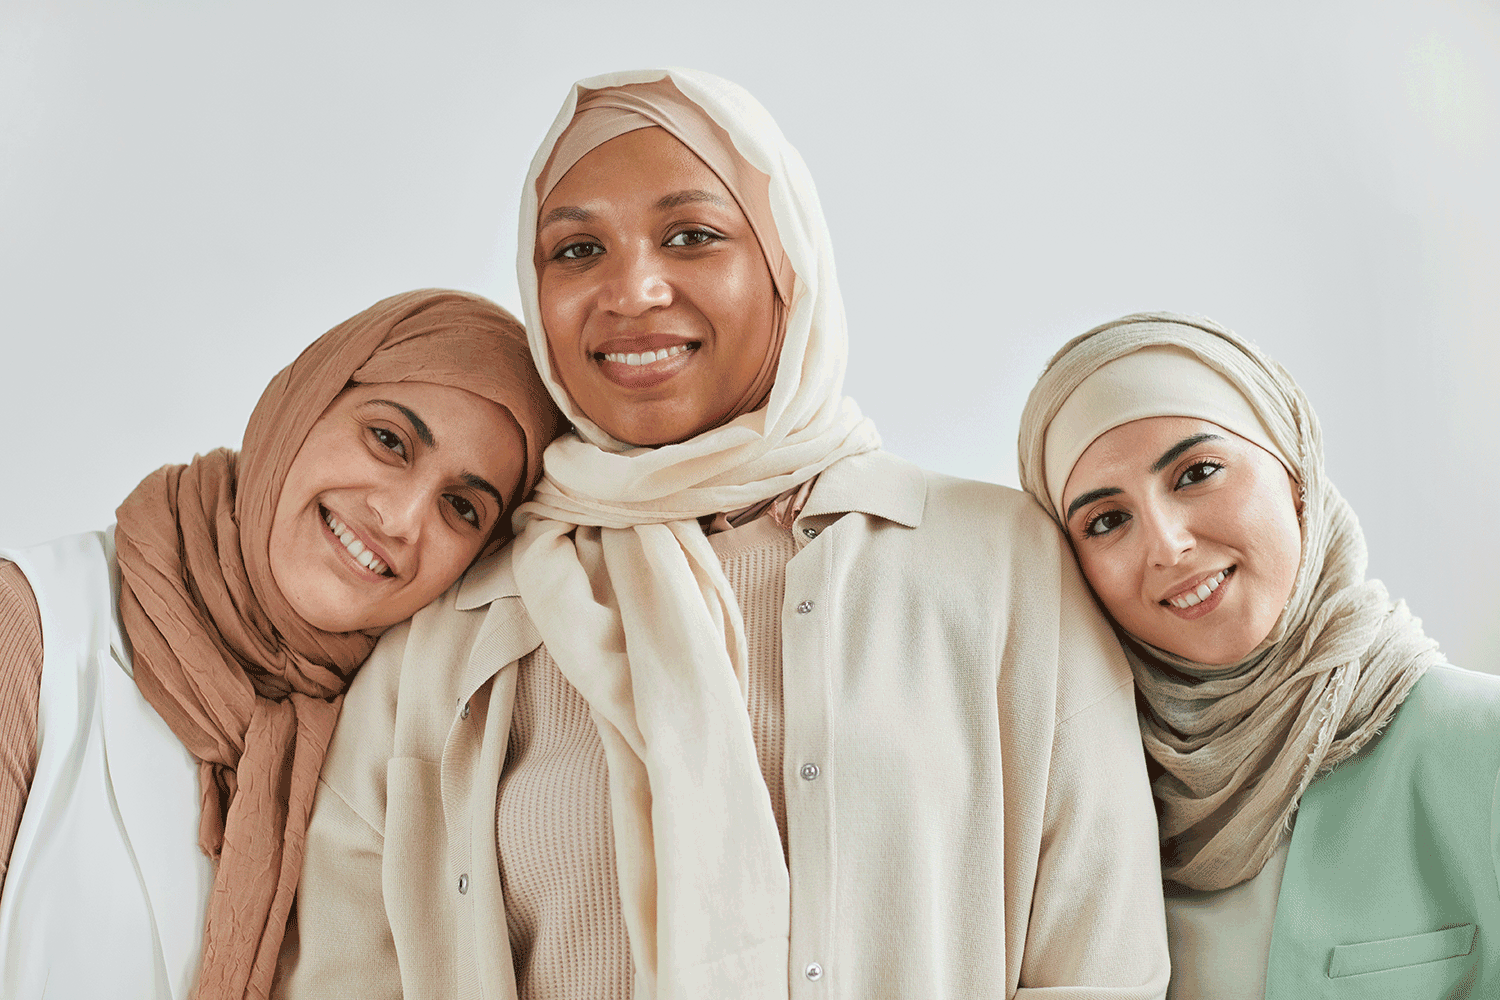 3 women stand next to each other wearing hijabs and smiling